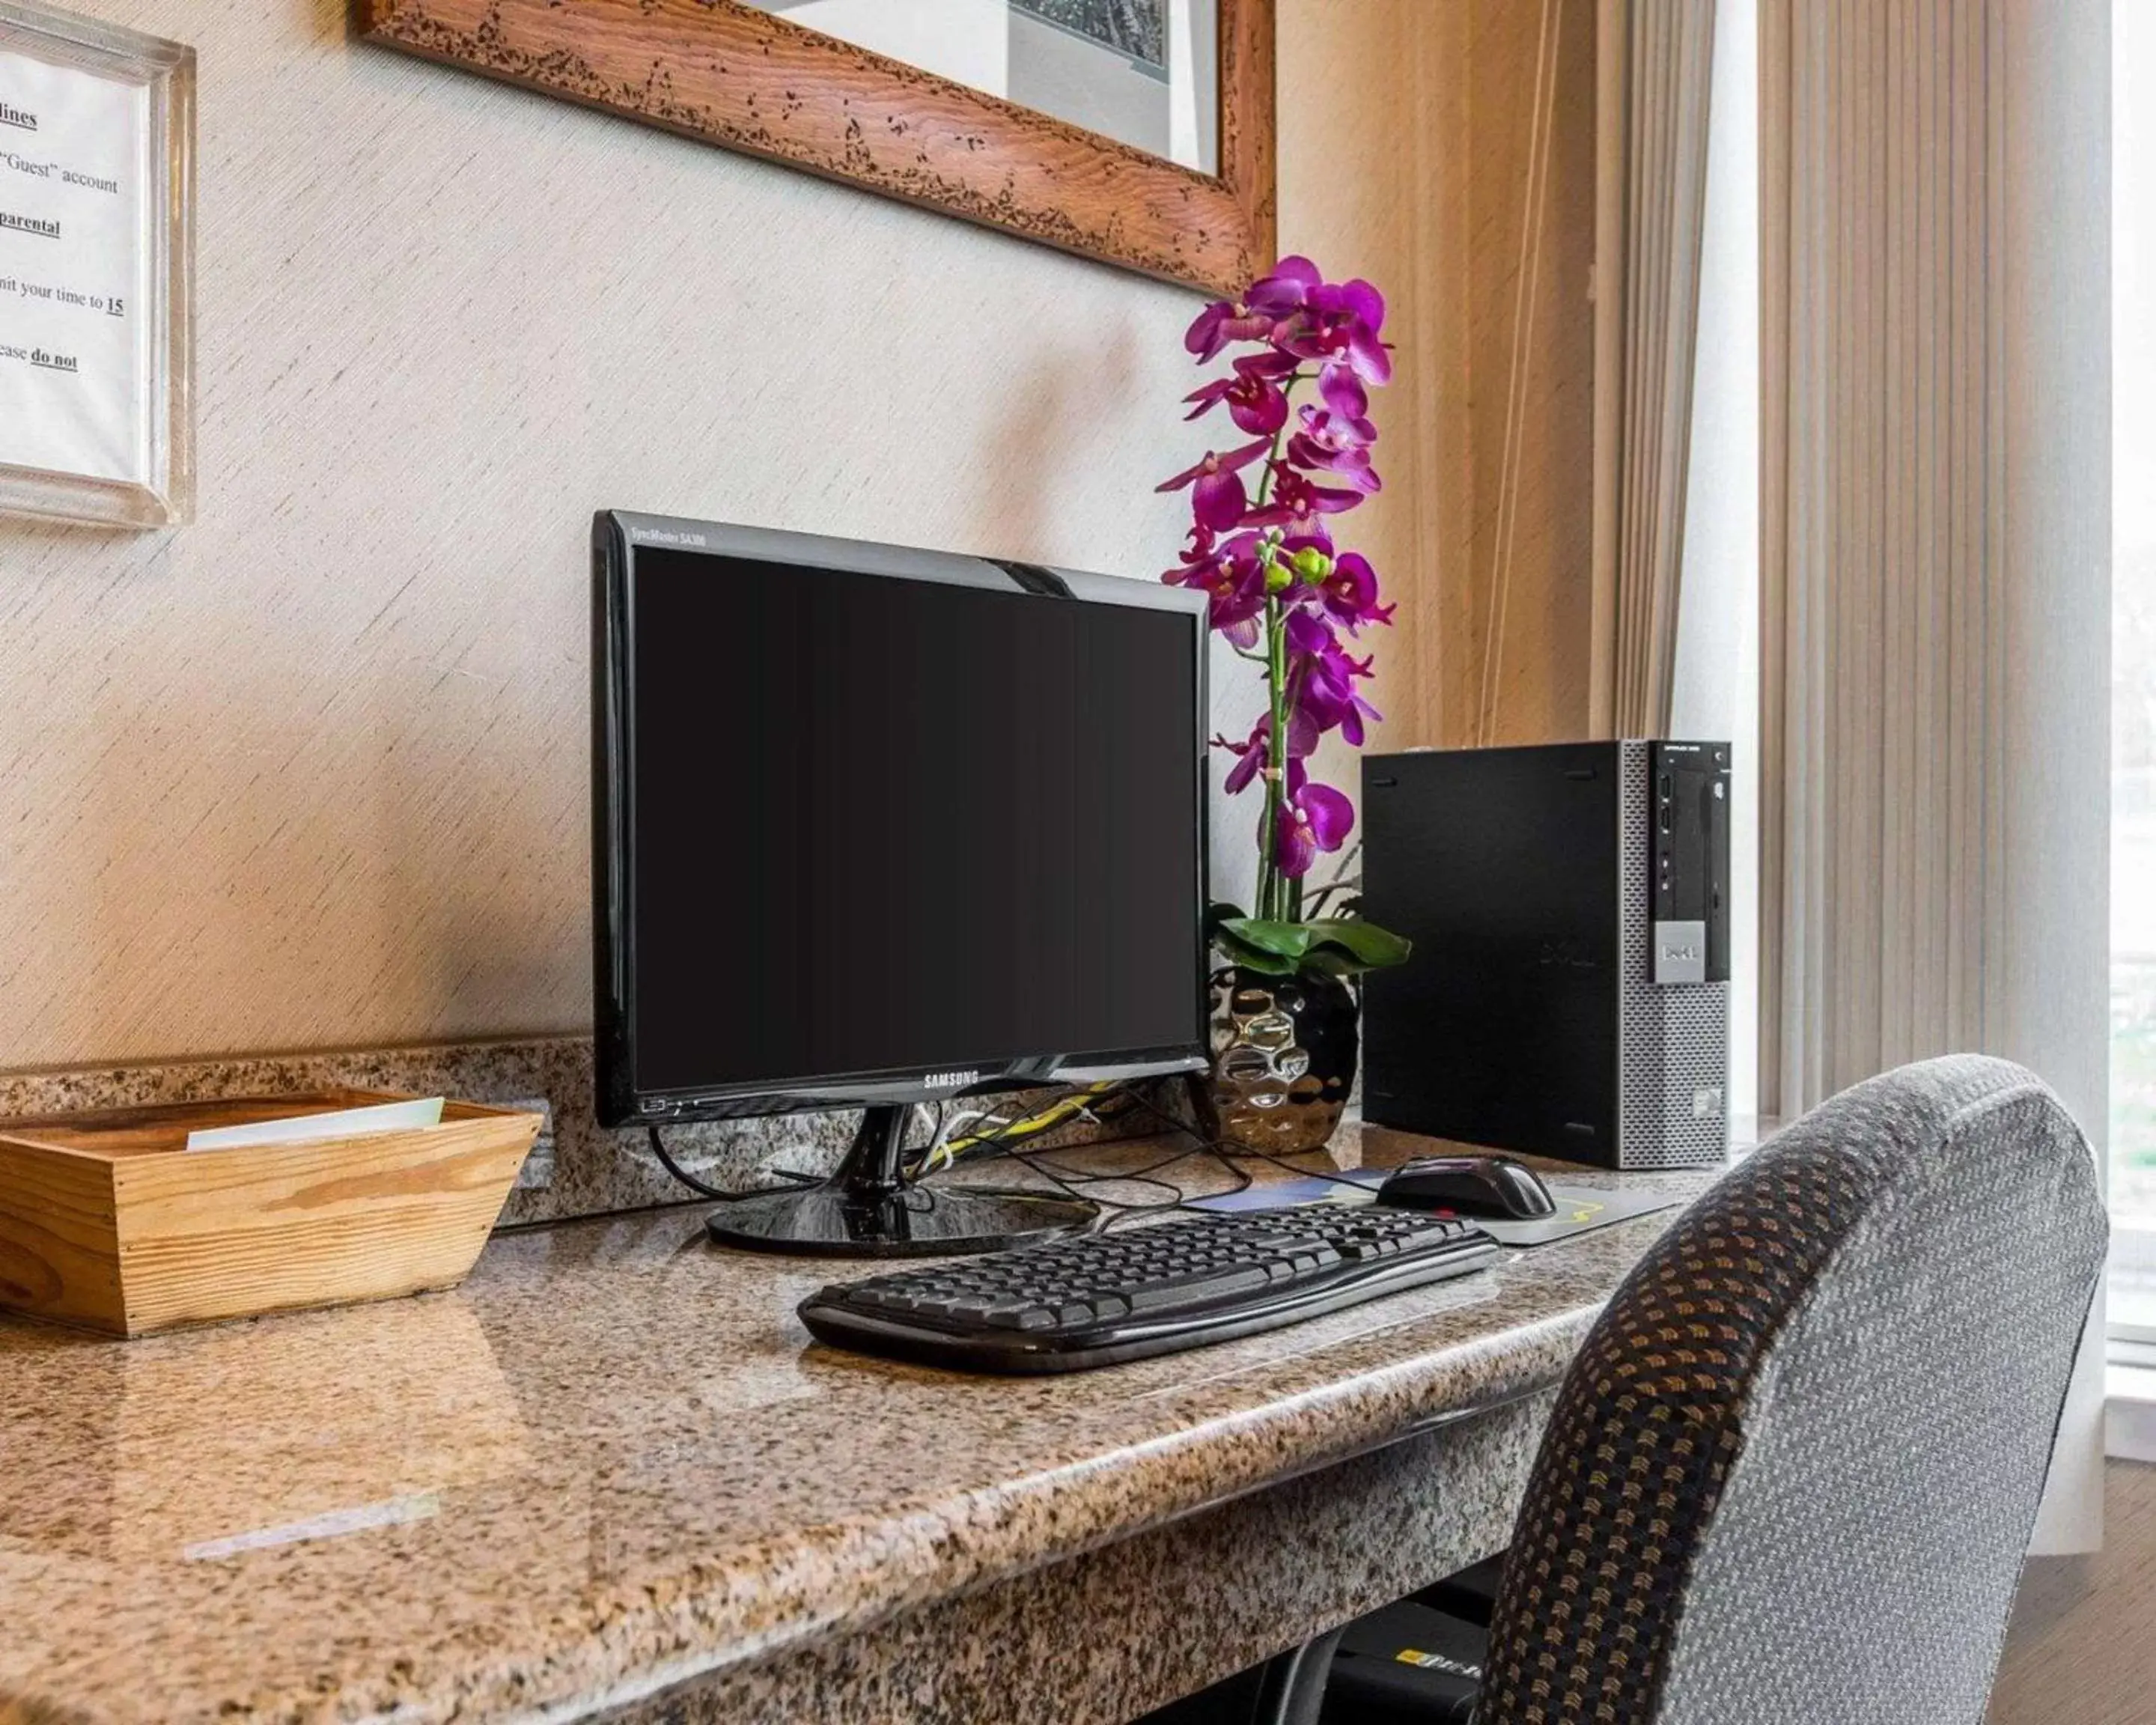 On site, TV/Entertainment Center in Comfort Inn & Suites Sequoia Kings Canyon - Three Rivers